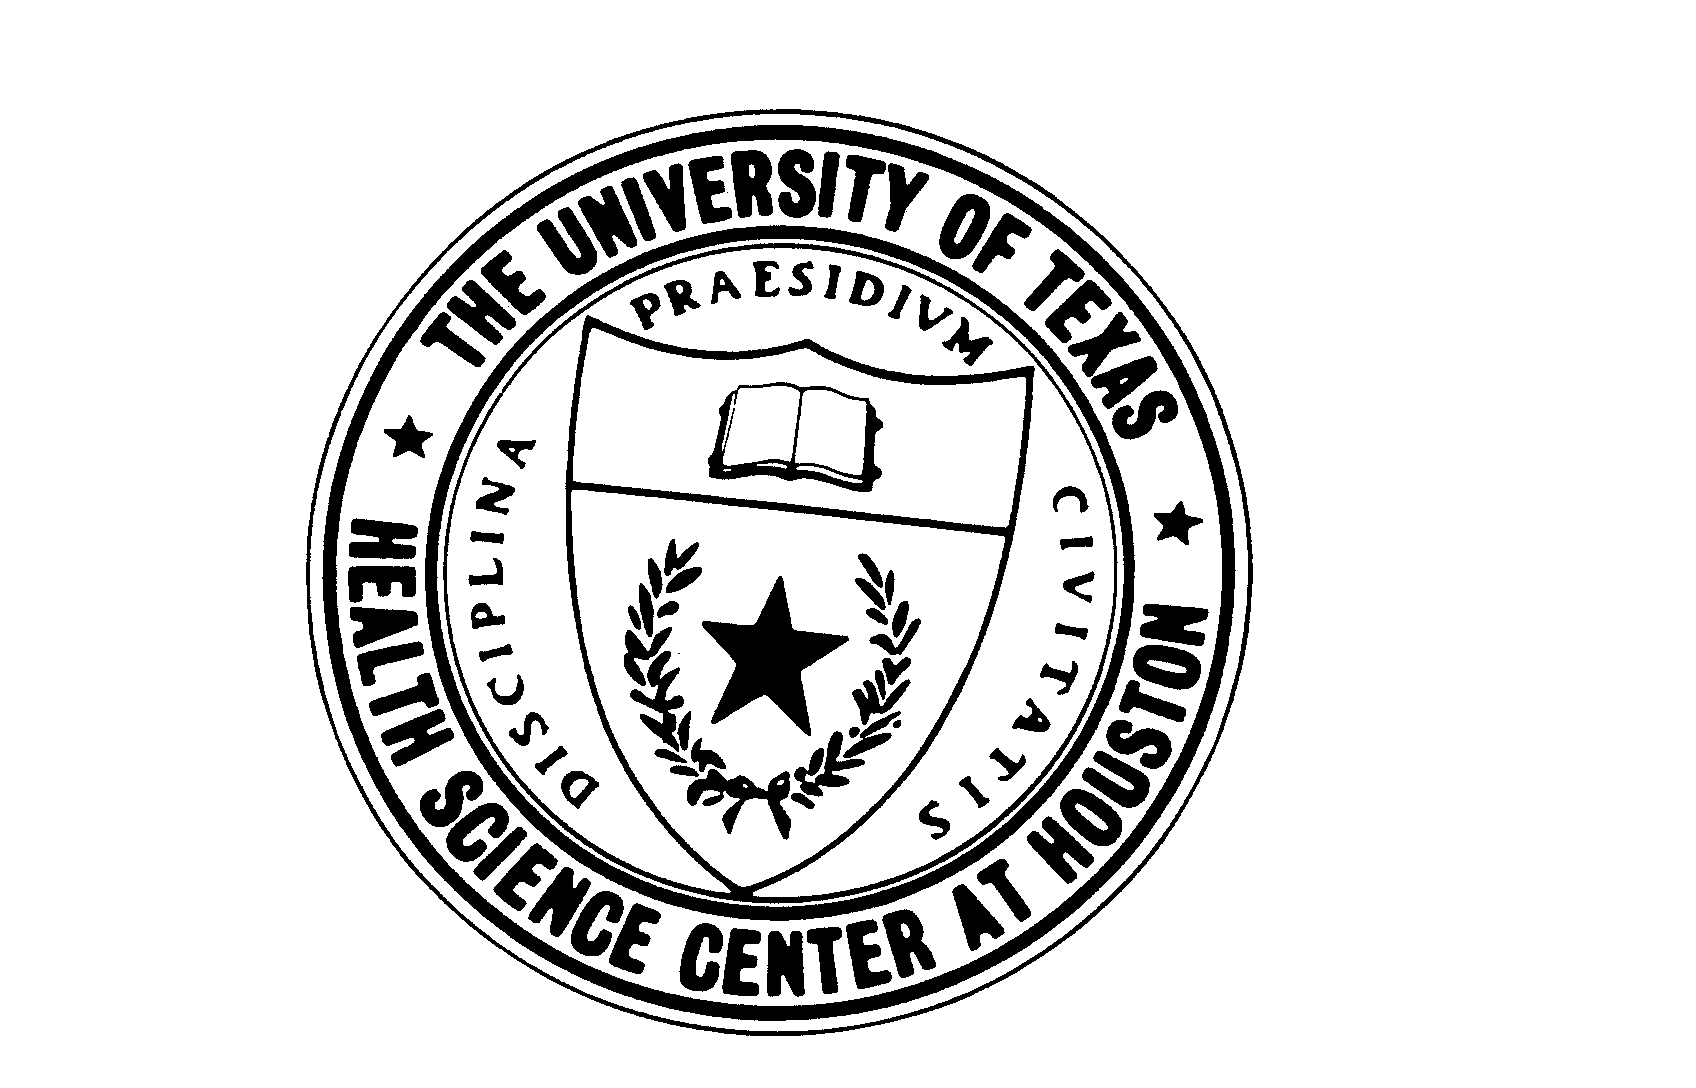  THE UNIVERSITY OF TEXAS HEALTH SCIENCE CENTER AT HOUSTON